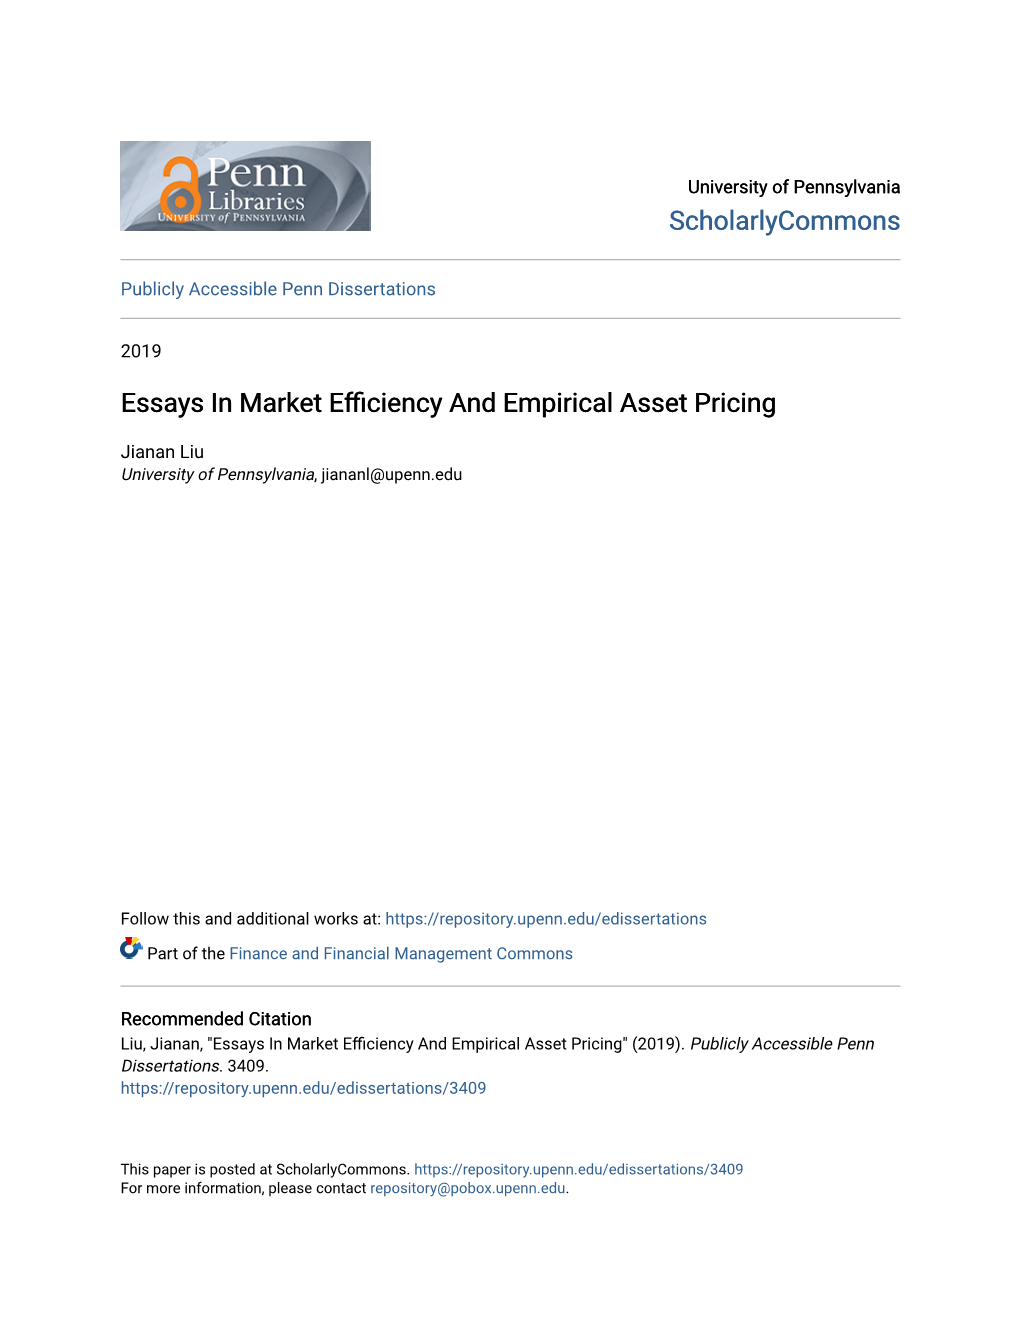 Essays in Market Efficiency and Empirical Asset Pricing